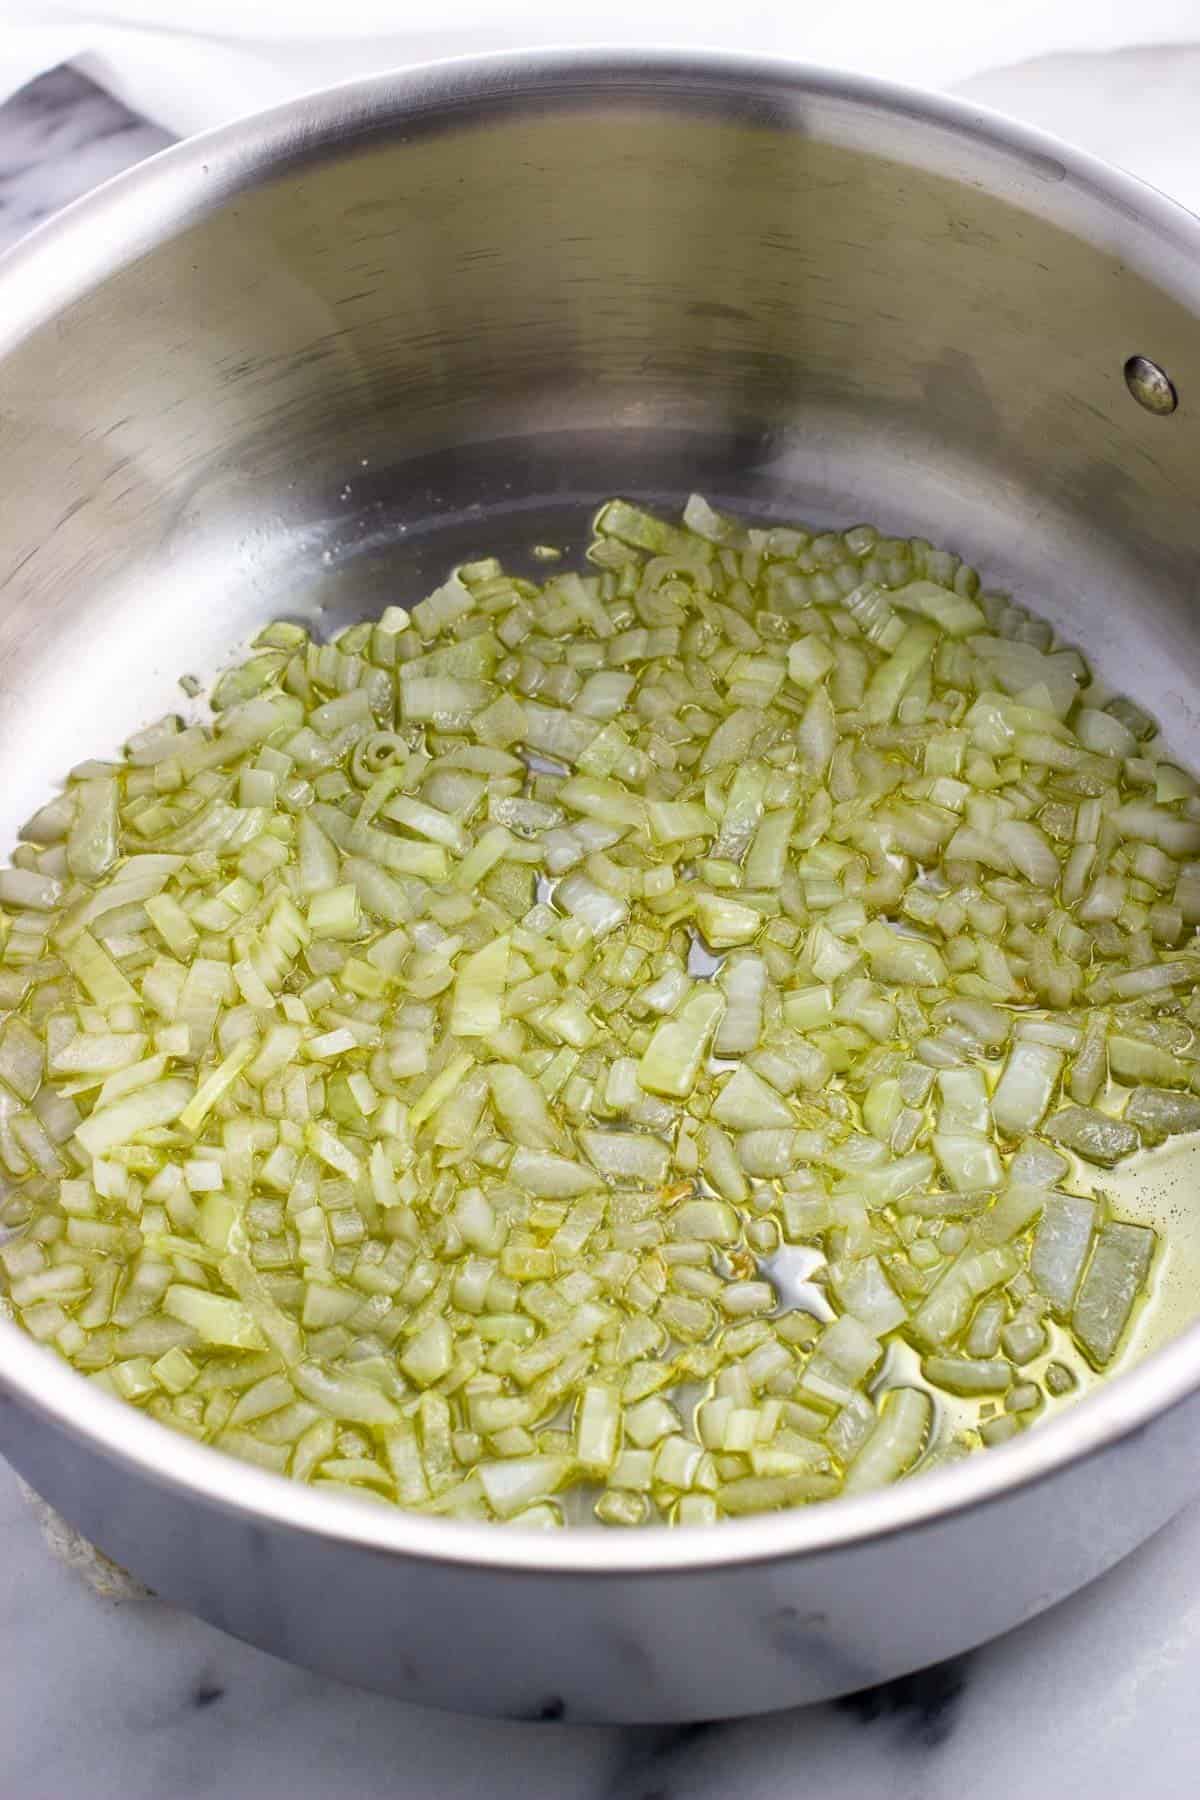 Sauteed onion and garlic in olive oil in a pan.